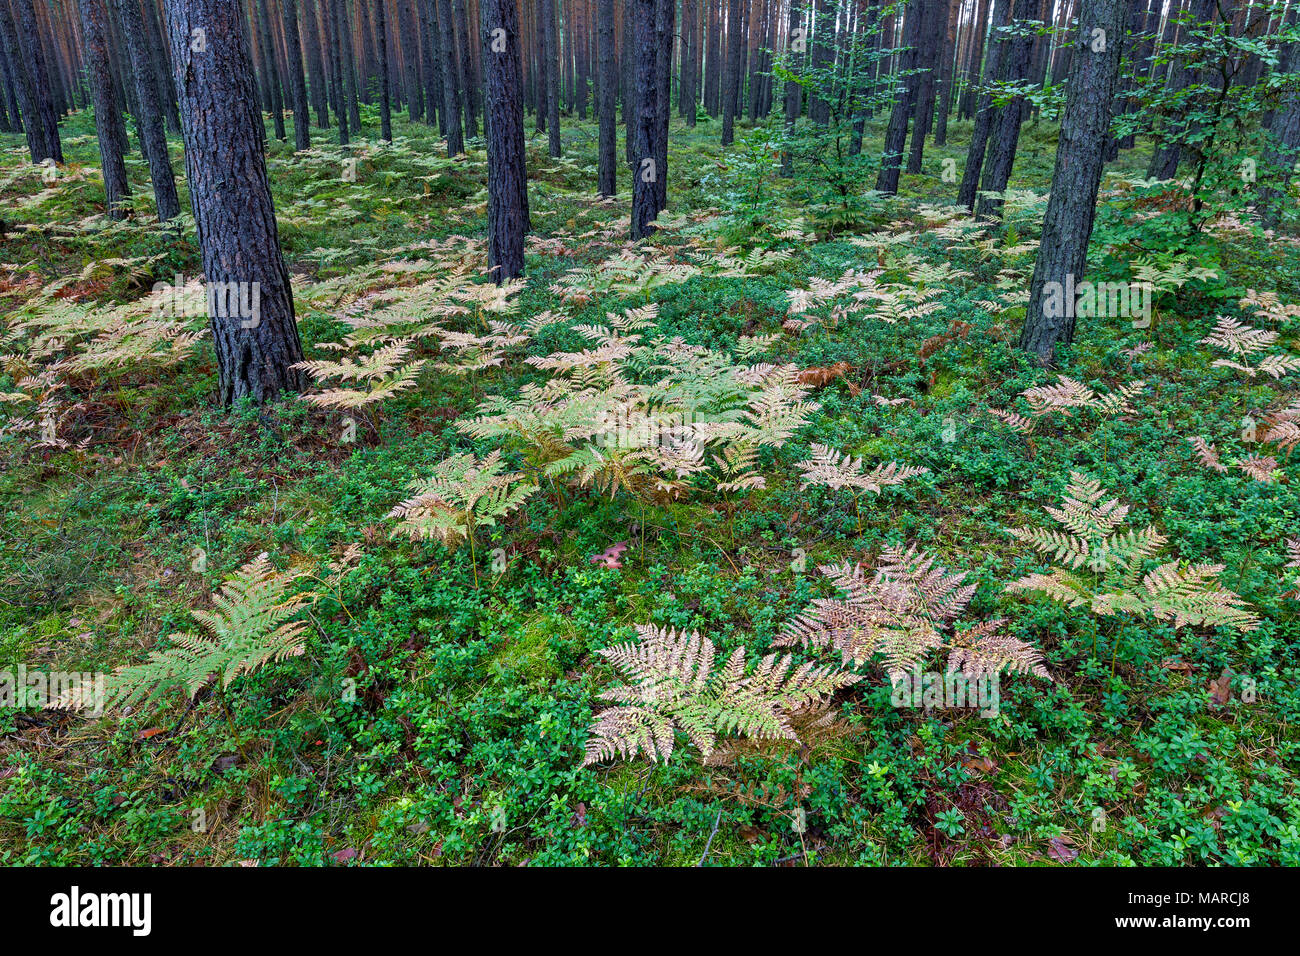 Braken (Pteridium aquilinum) in a Pine forest in fall. Germany Stock Photo